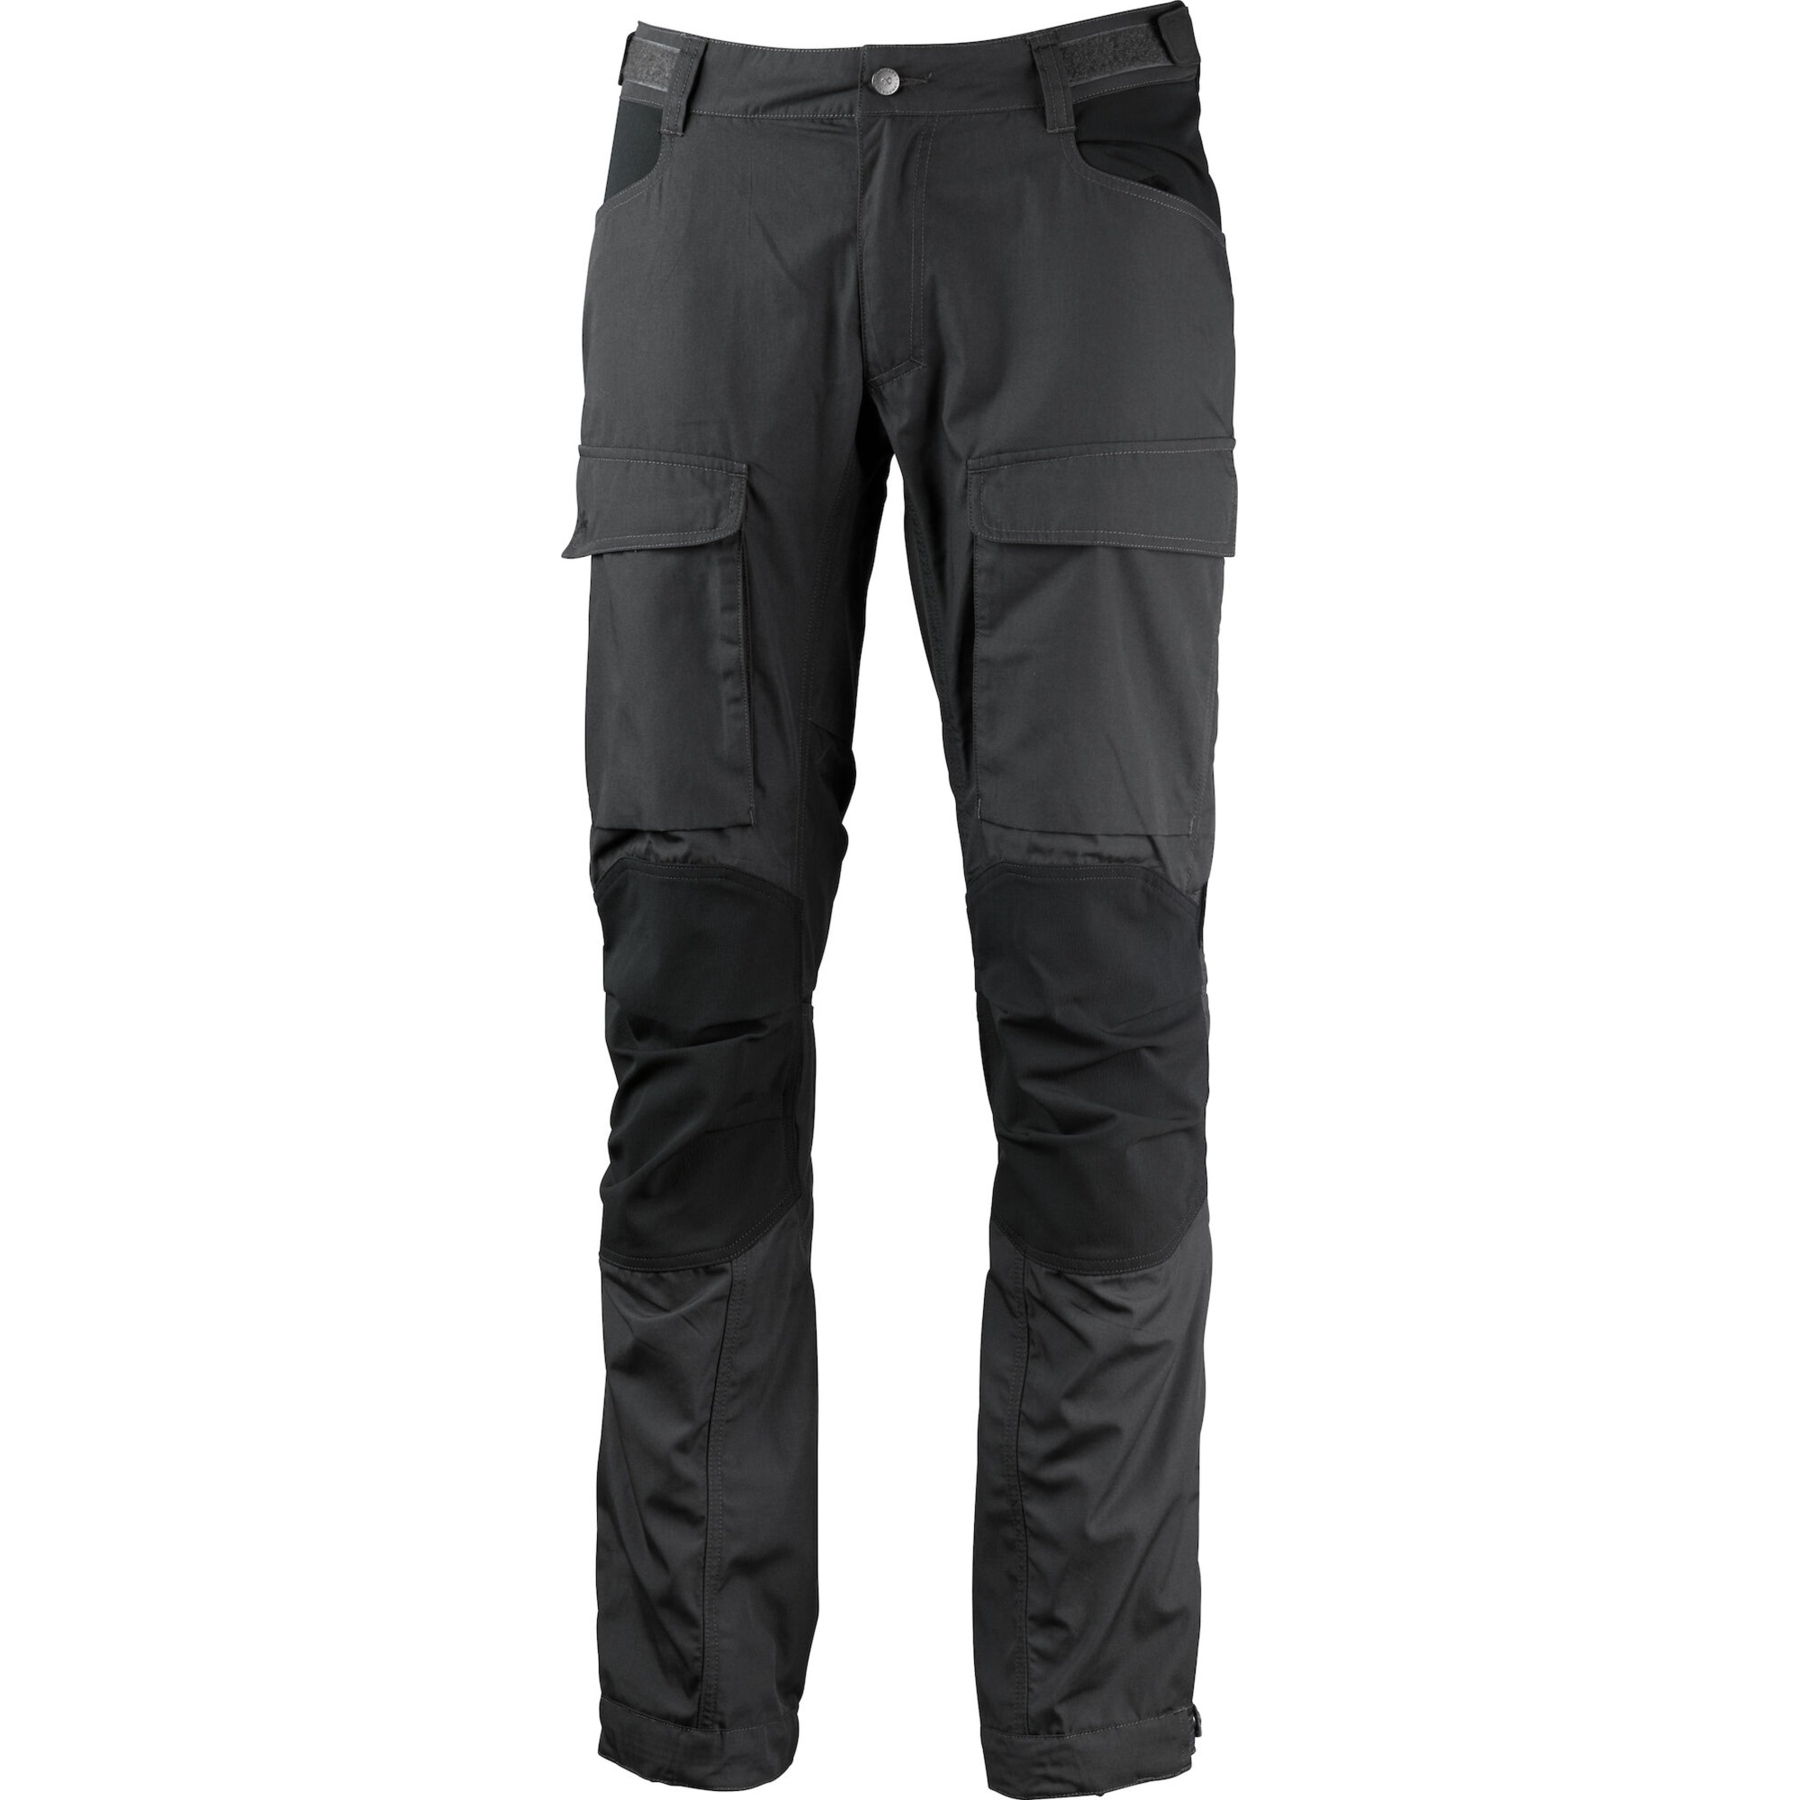 Picture of Lundhags Authentic II Hiking Pants - Granite/Charcoal 834